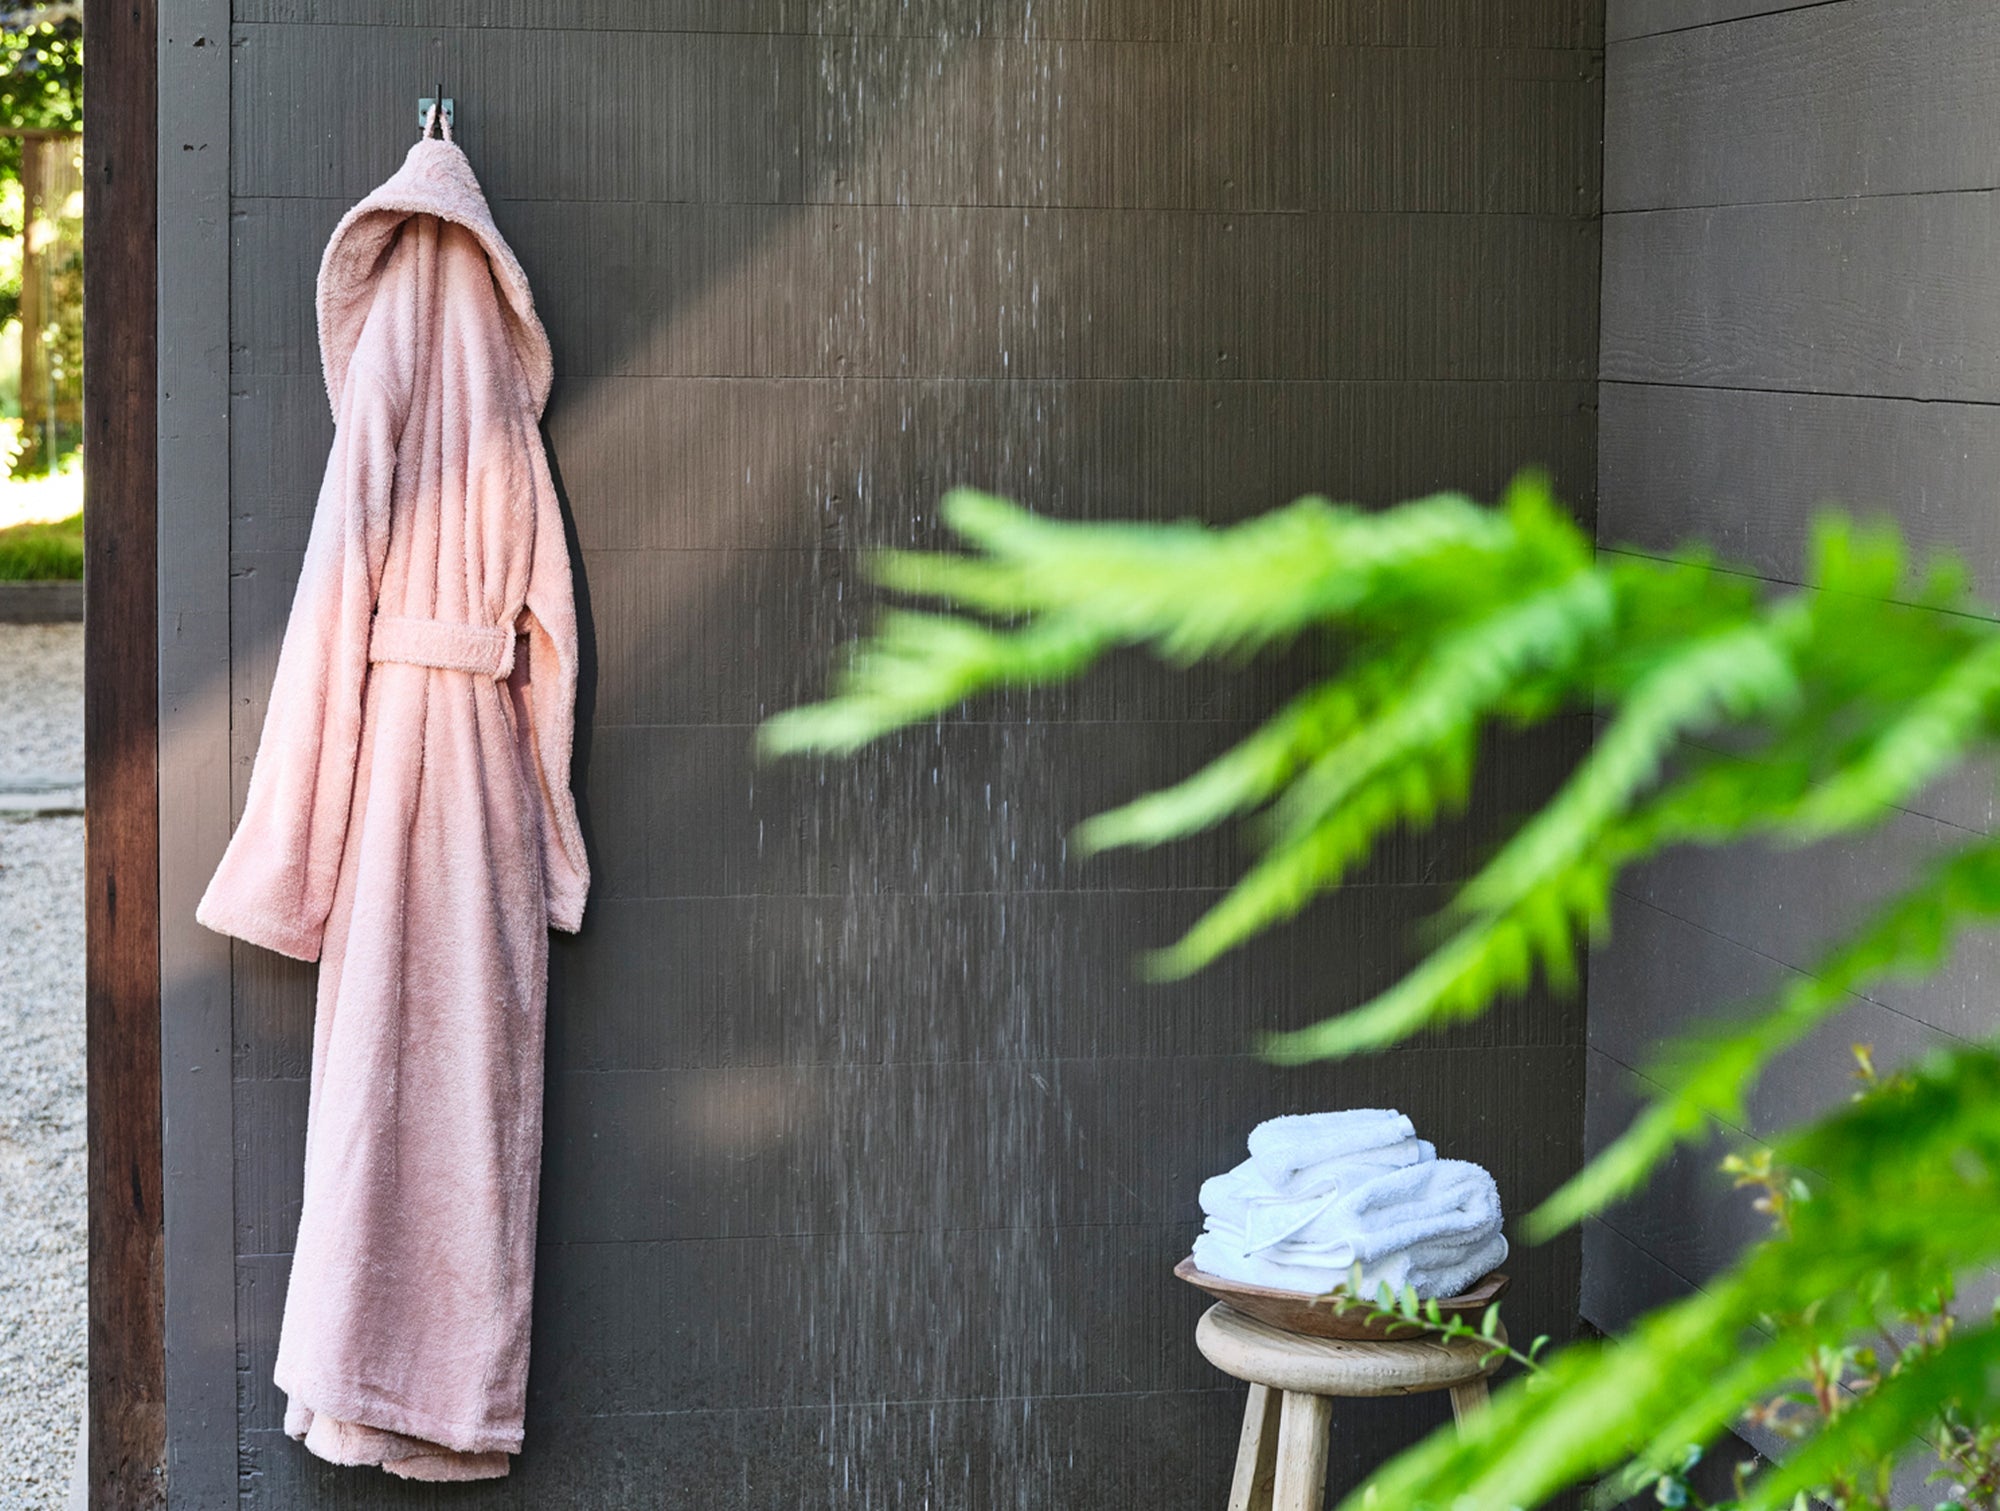 Upgrade Your Shower Time with These Discounted Robes and Towels